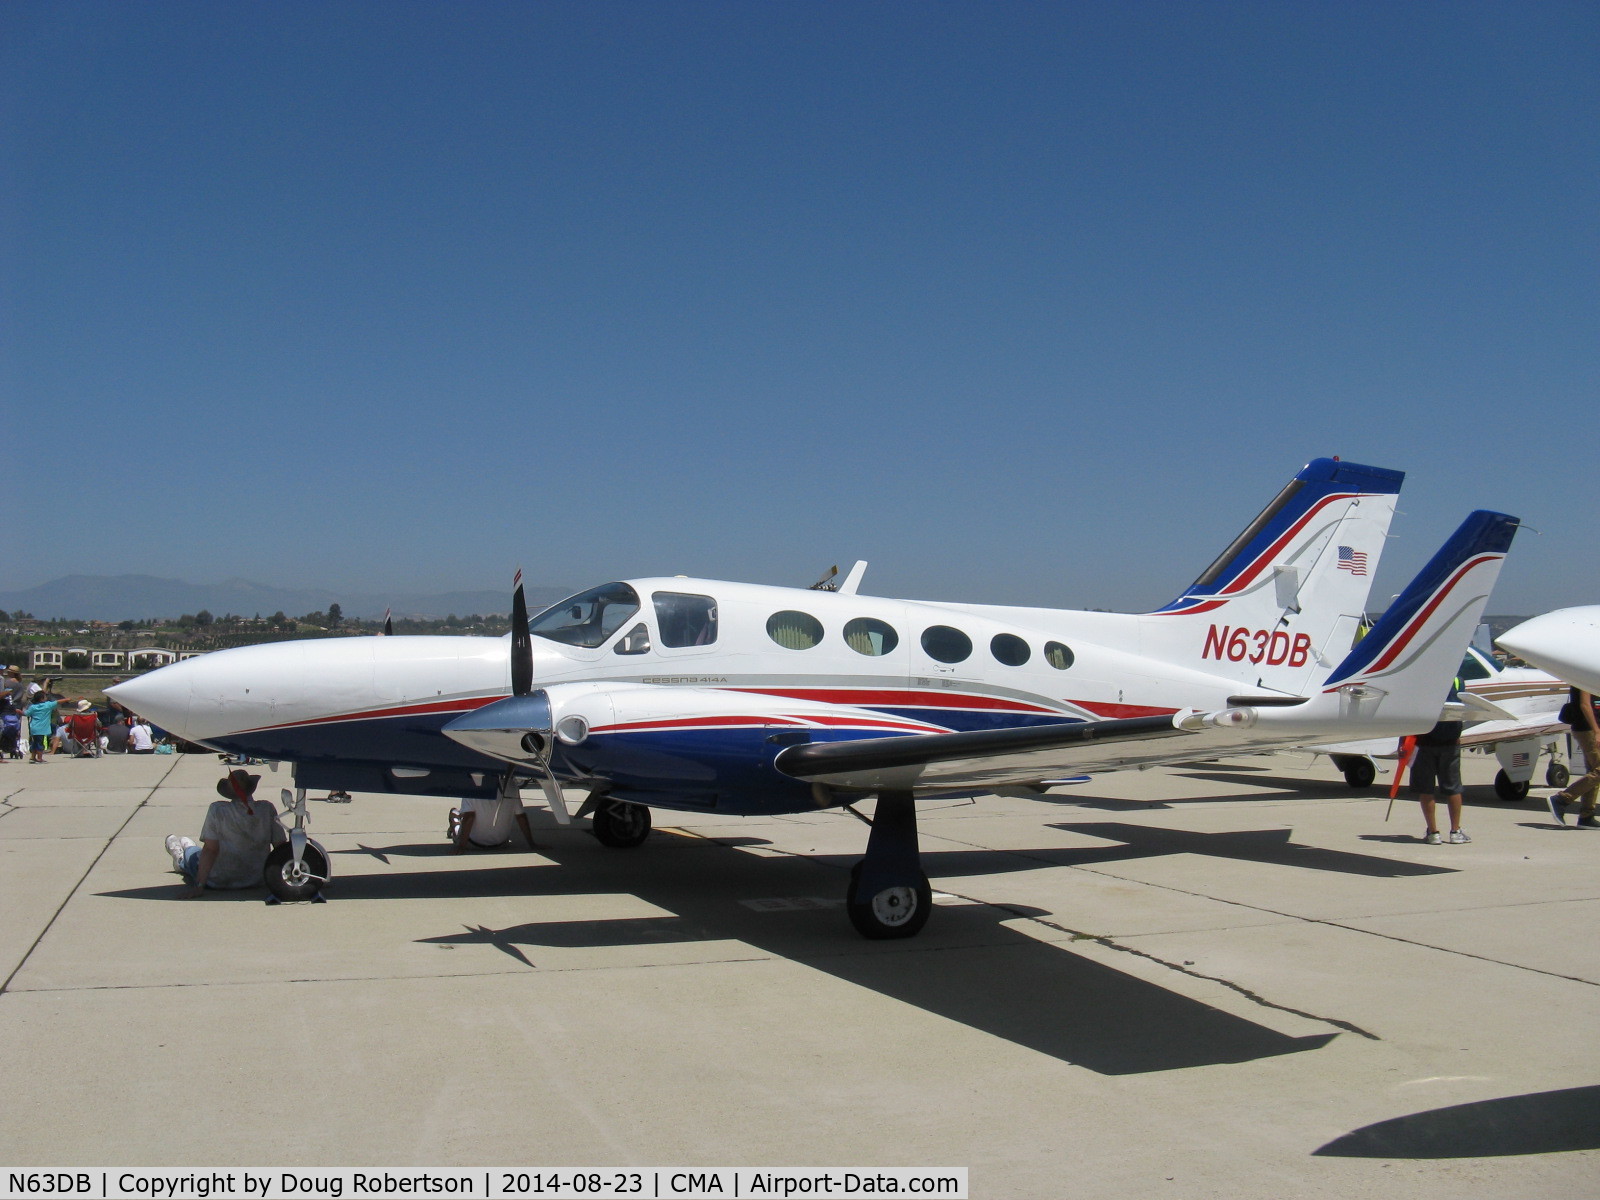 N63DB, Cessna 414A Chancellor C/N 414A1211, Cessna 414A CHANCELLOR, two Continental TSIO-520-NB 310 Hp each direct-drive engines, a lighter, simpler, lower cost version derived from C 421. Bonded wet wing with no tip tanks.